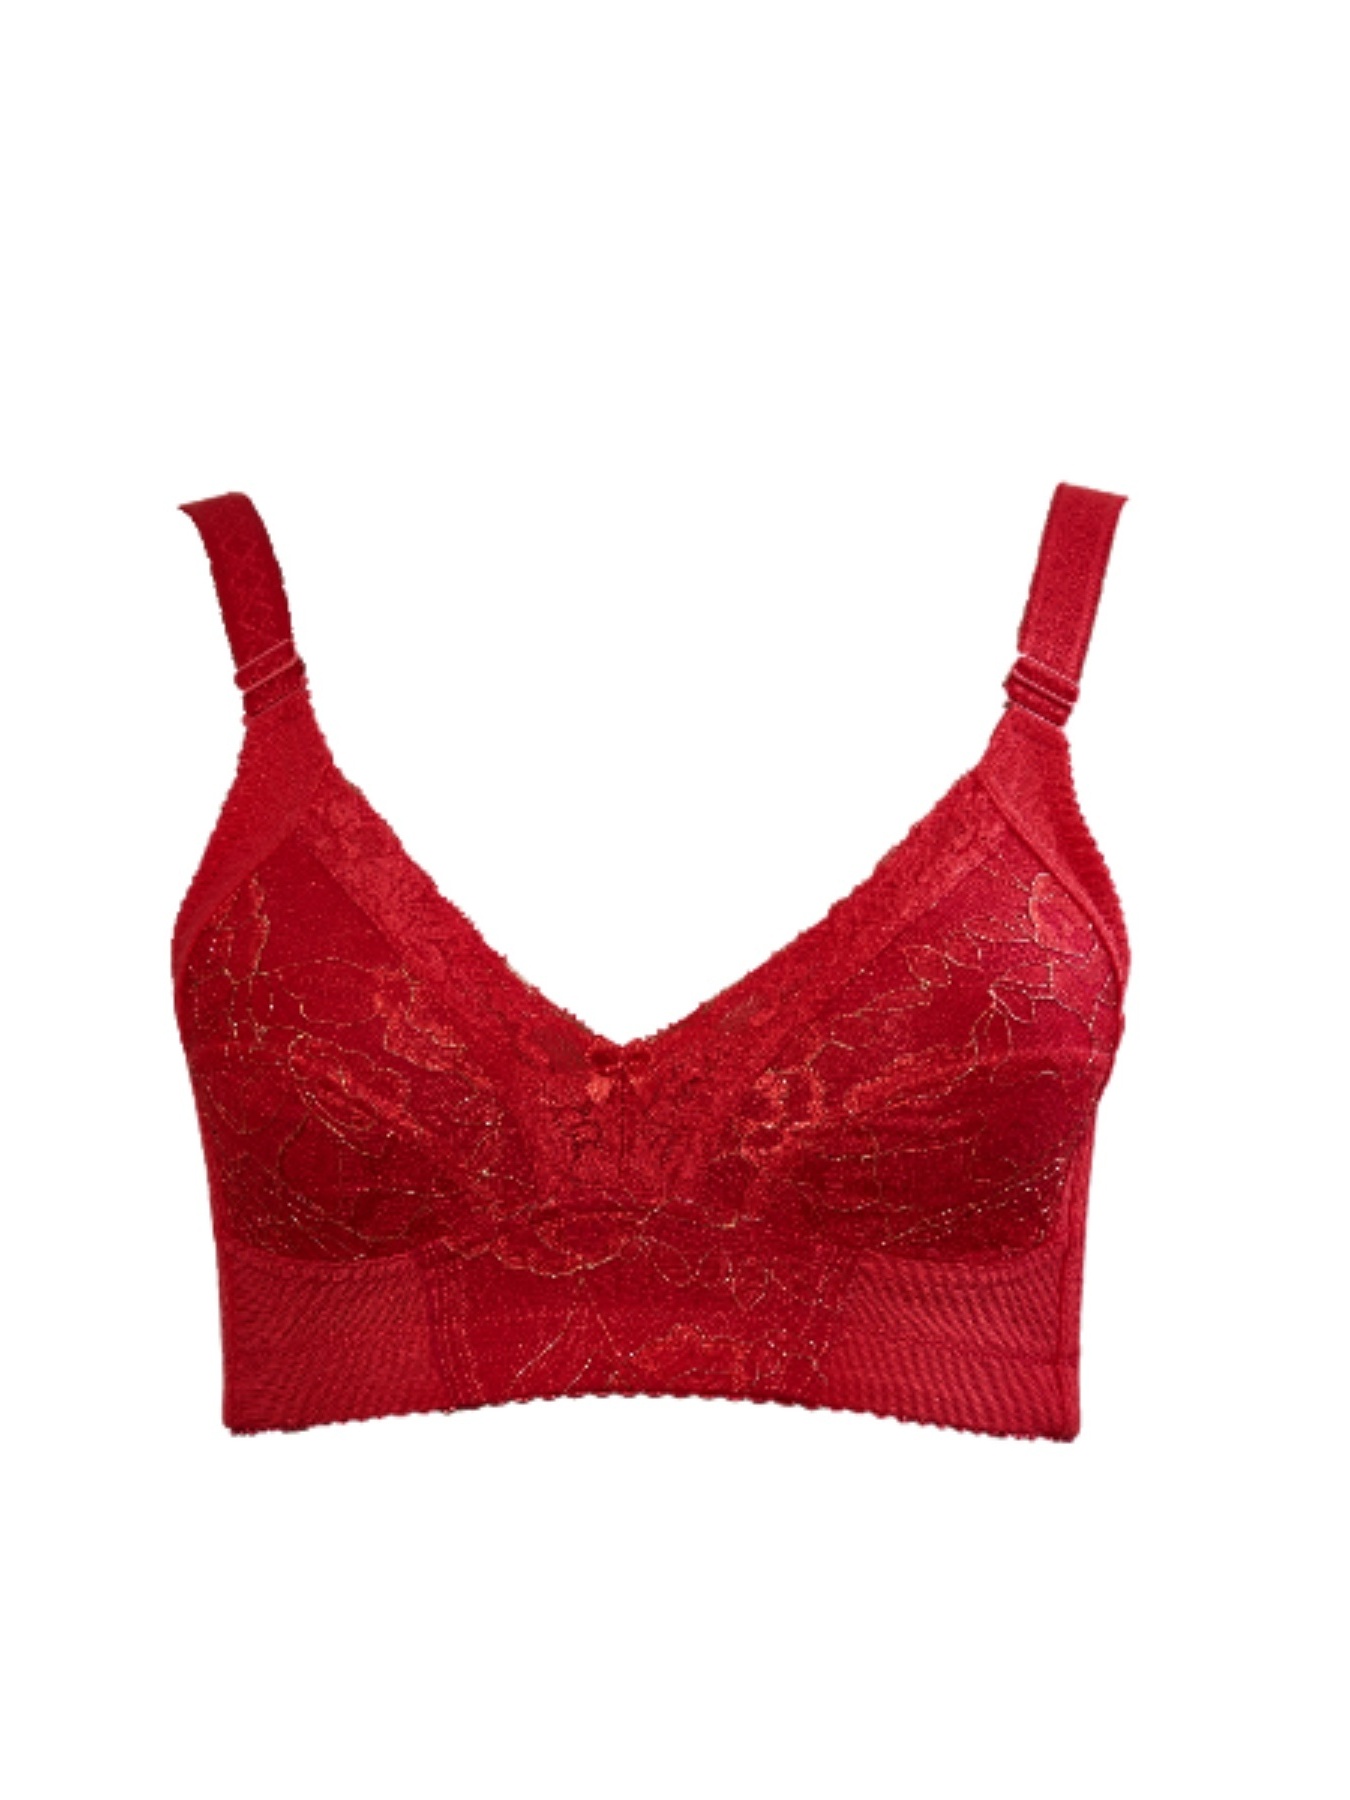 Sports Bras for Women Underwire Push Up Bralettes Solid Red 42D